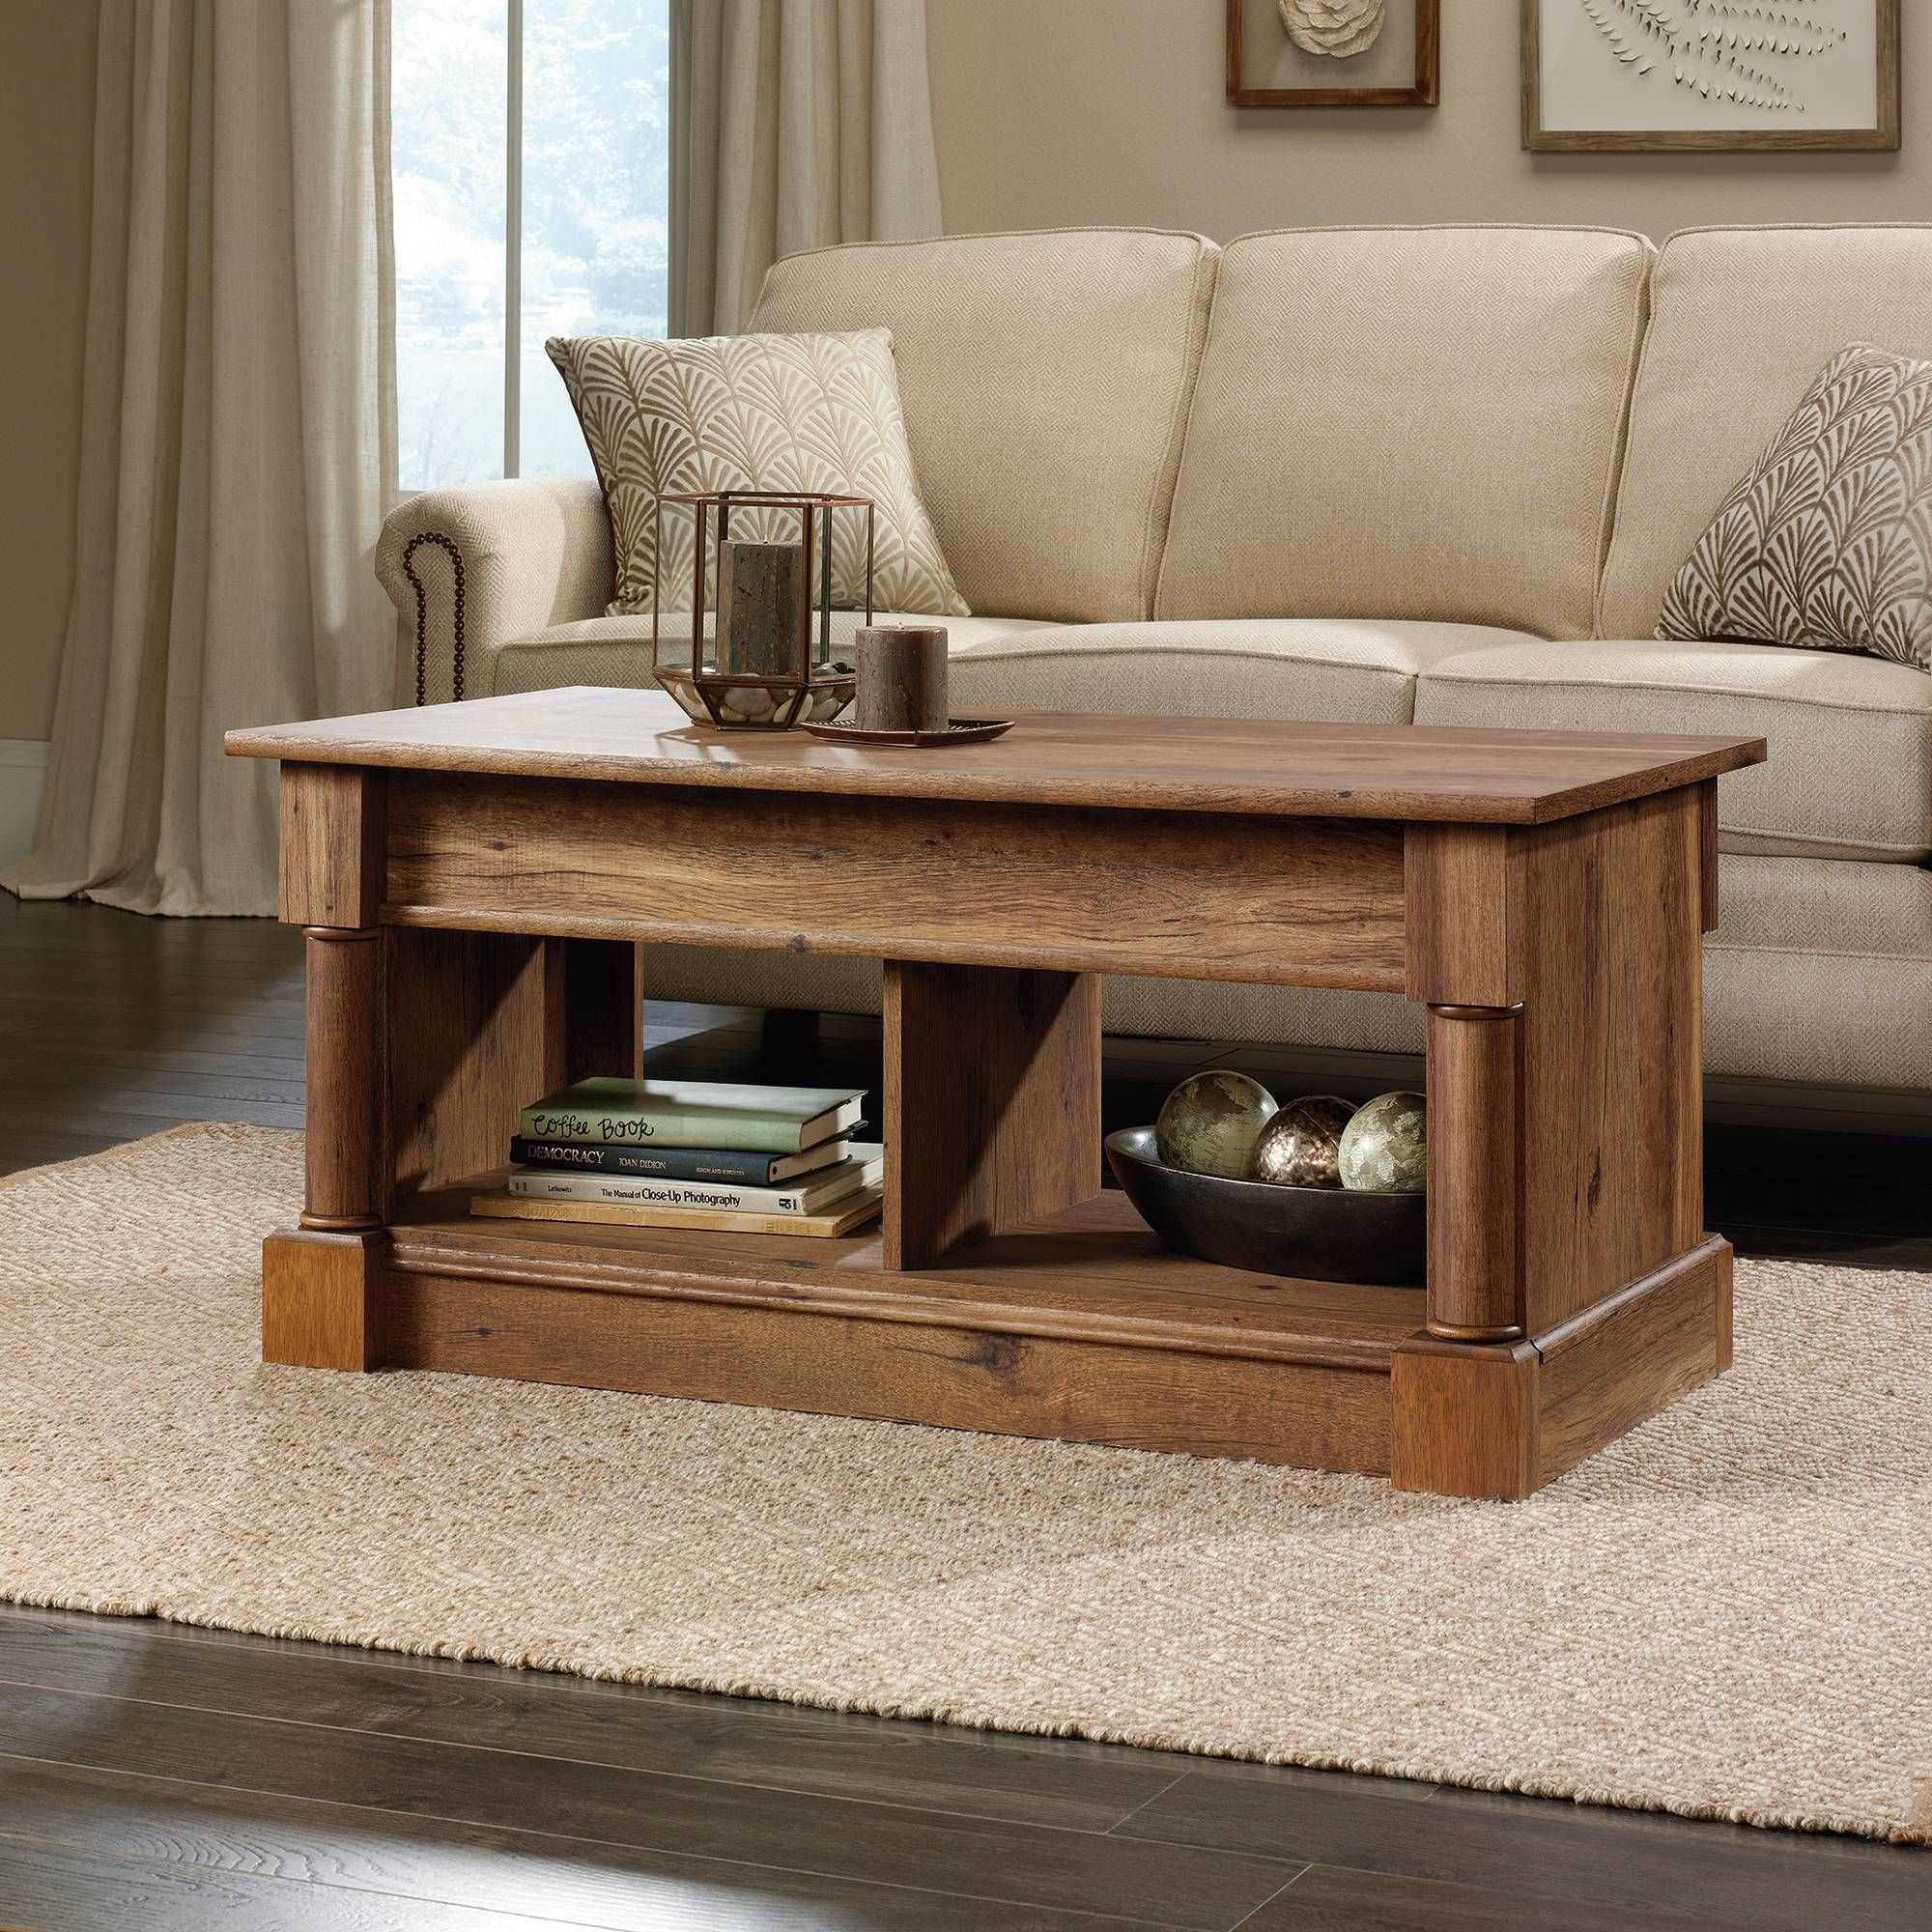 Palladia | Lift Top Coffee Table | 420716 | Sauder Intended For Lift Top Oak Coffee Tables (View 22 of 30)